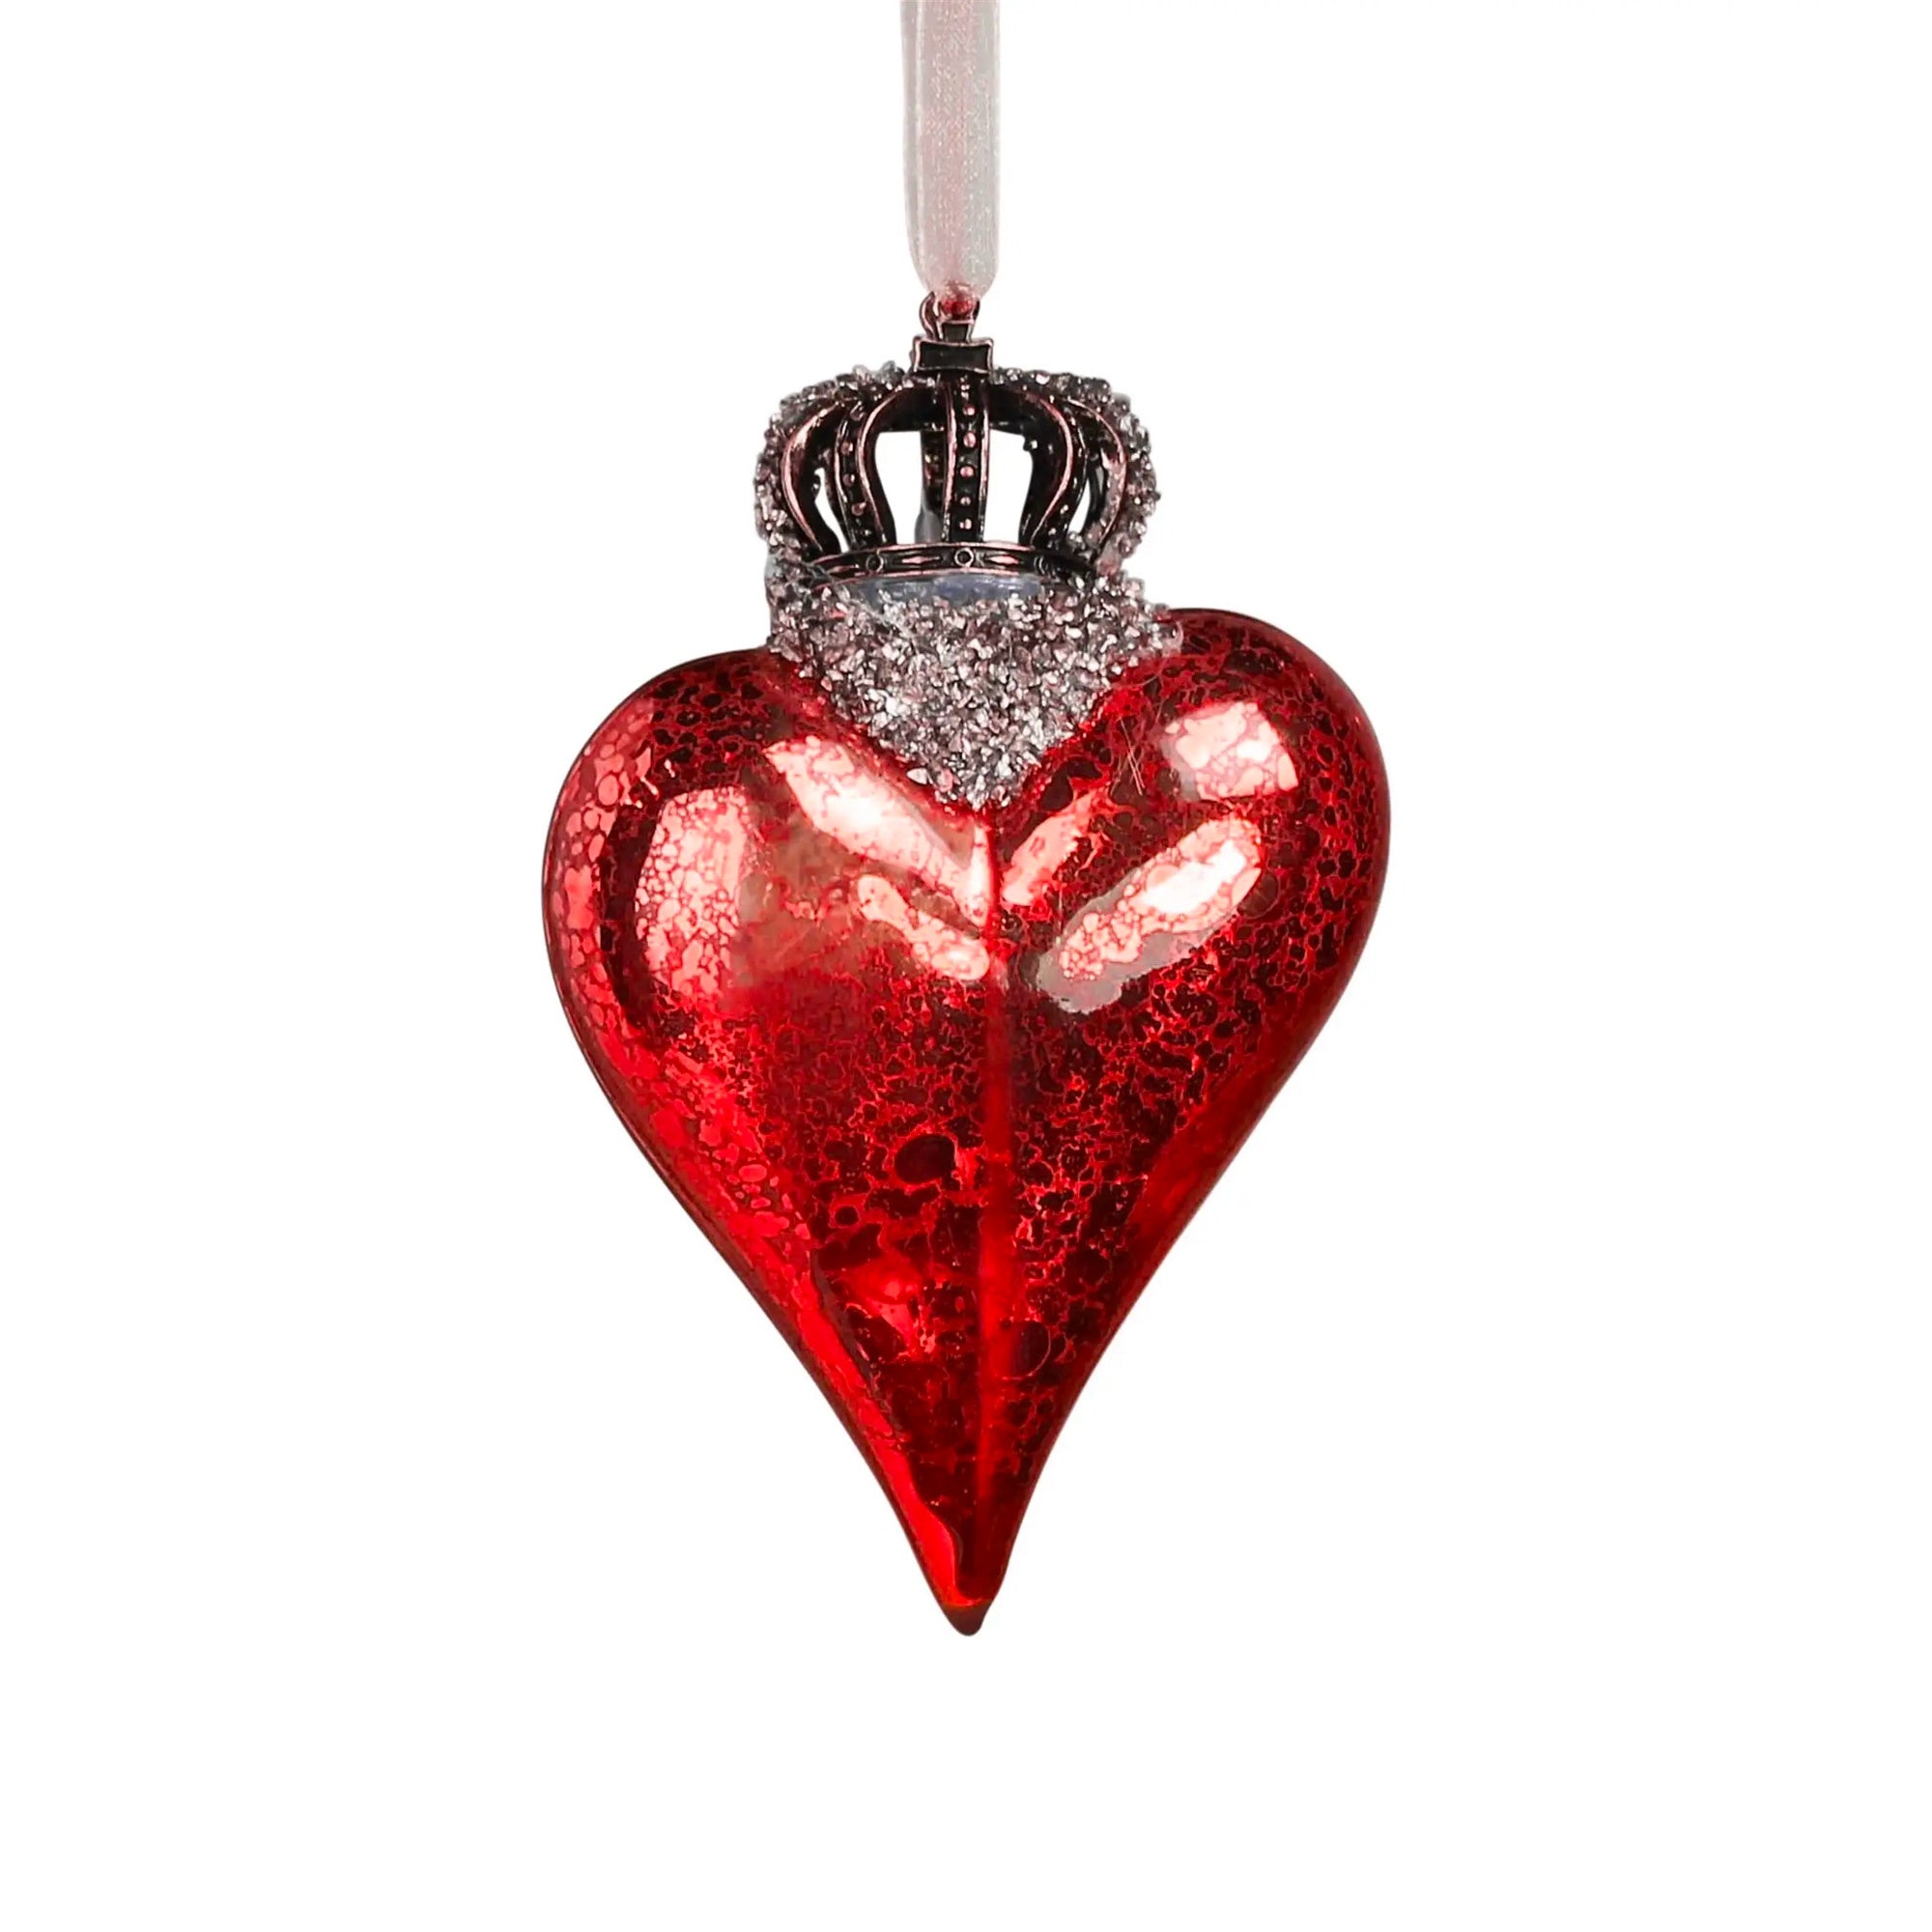 Red Crowned Heart Ornament